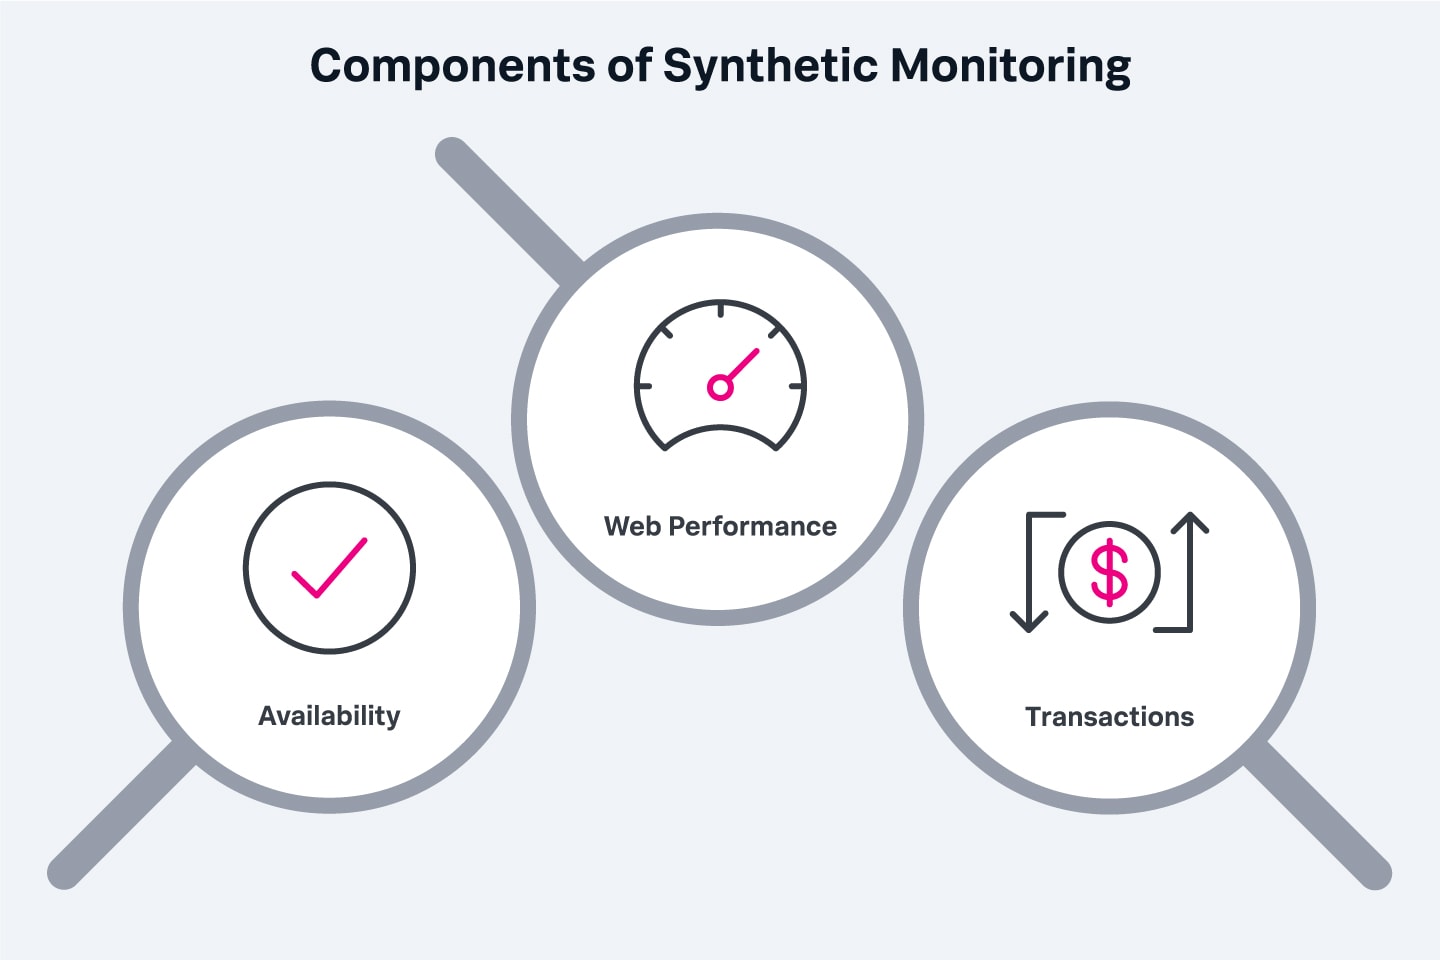 Availability, web performance and transactions are the three areas monitored through synthetic monitoring.